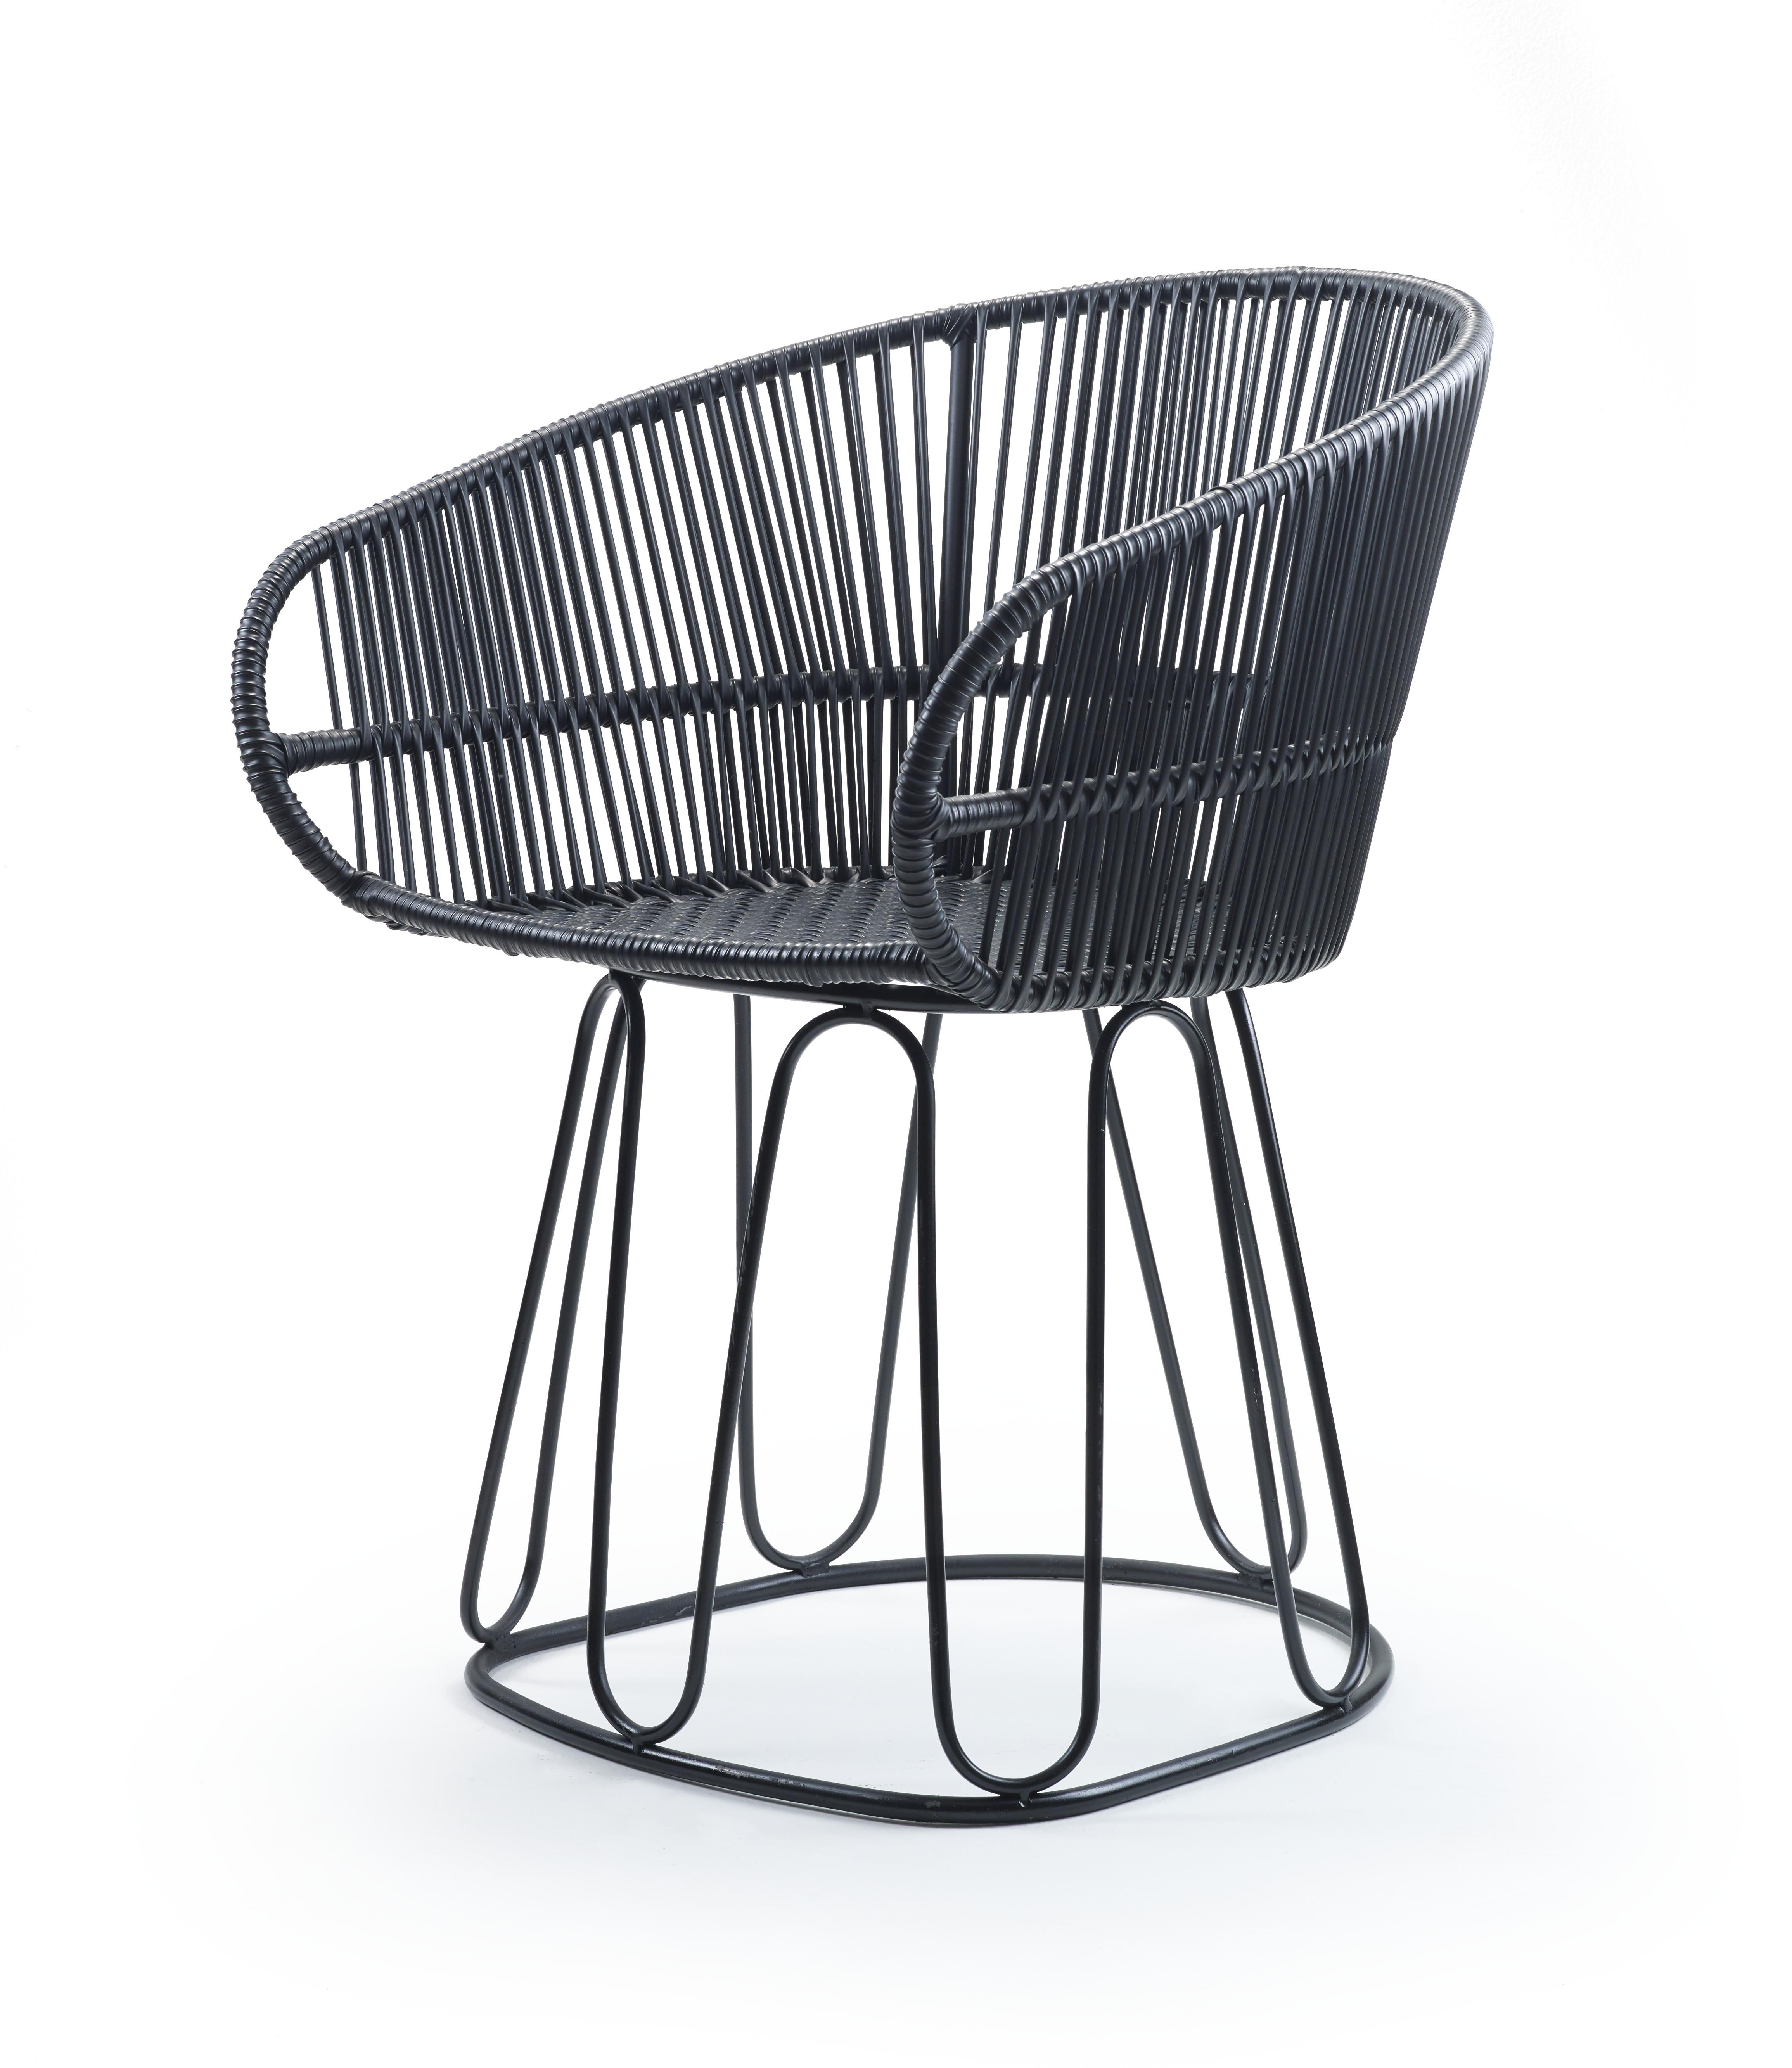 Set of 4 black circo dining chair by Sebastian Herkner
Materials: Galvanized and powder-coated tubular steel. PVC strings.
Technique: Made from recycled plastic. Weaved by local craftspeople in Colombia. 
Dimensions: W 61.5 x D 56.5 x H 77.5 cm